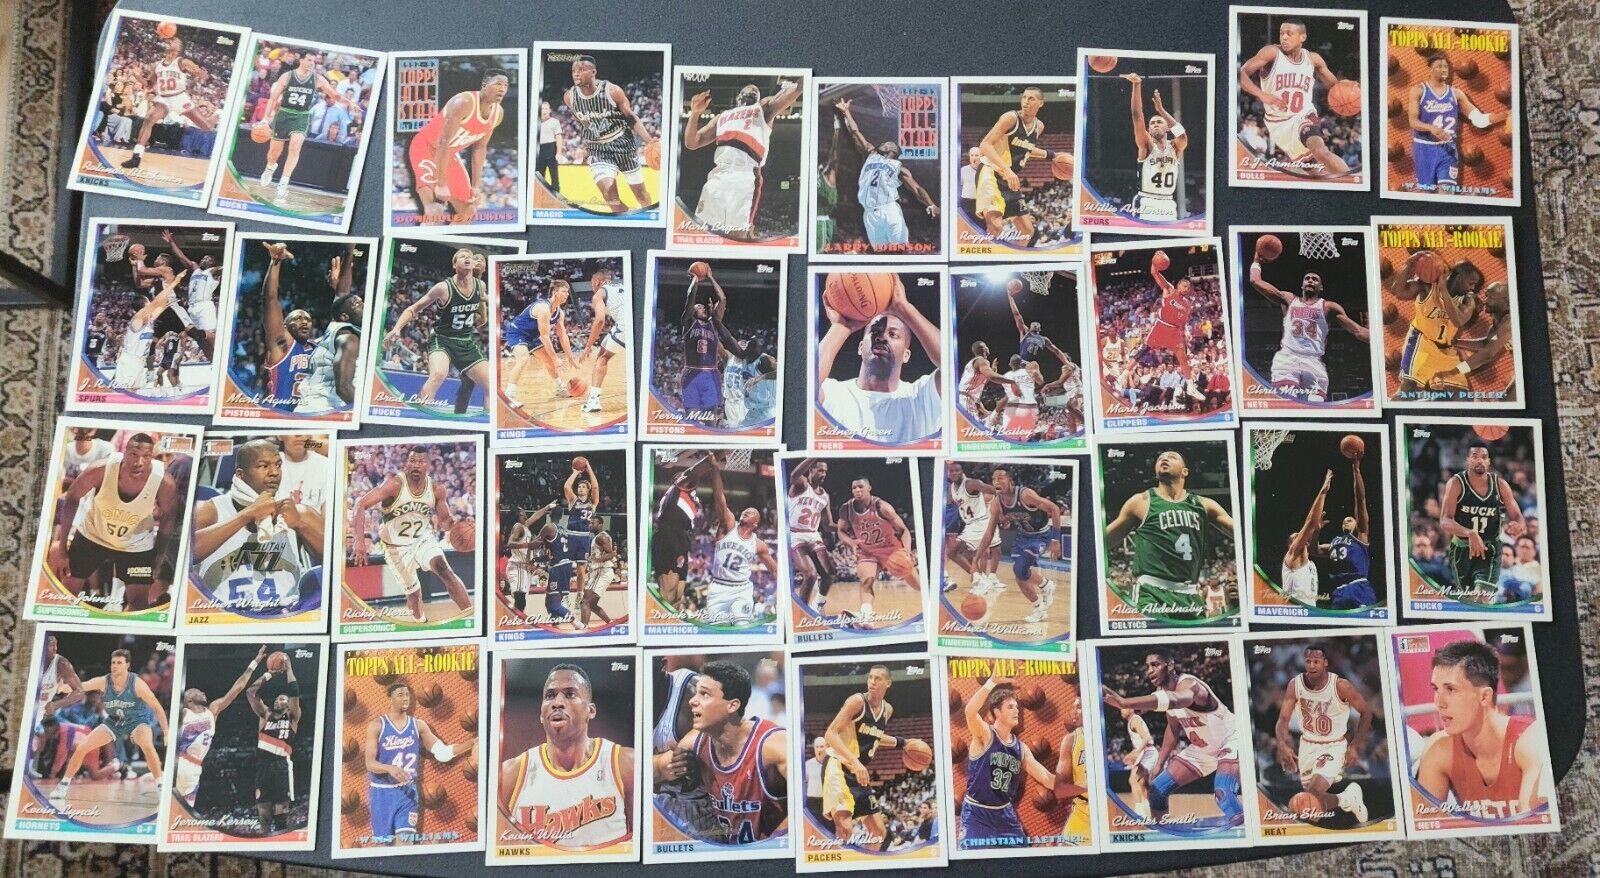 1993-94 TOPPS BASKETBALL CARD LOT OF 40 CARDS-MULTIPLE CARDS